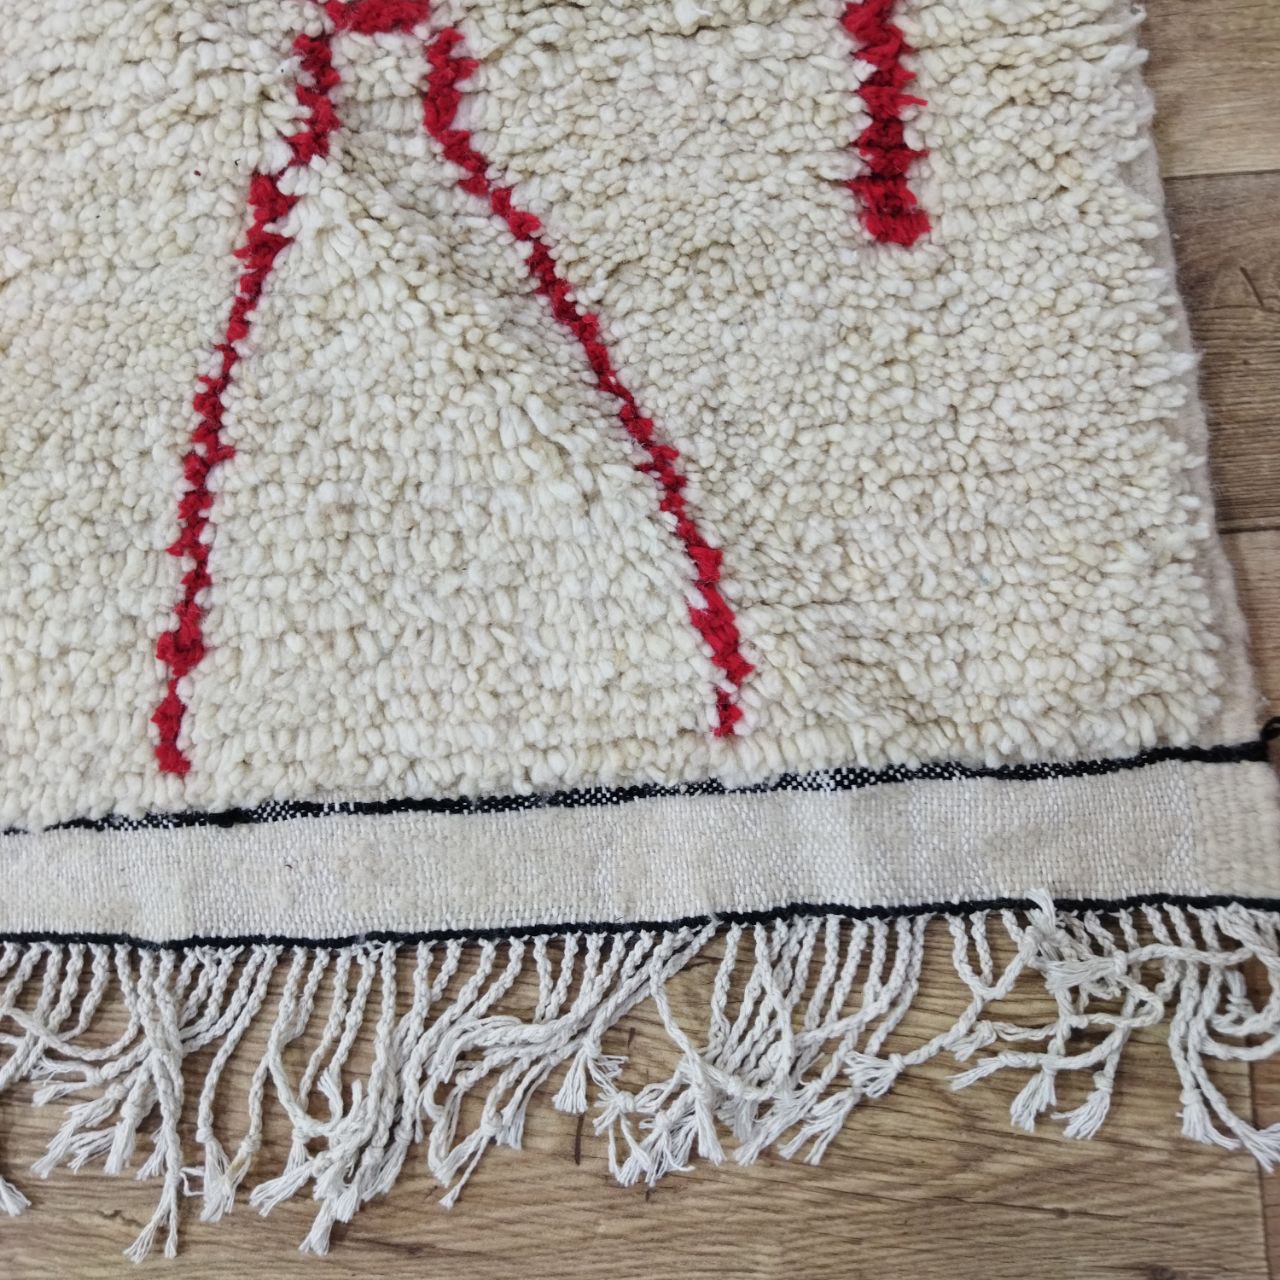 Exquisite Moroccan Berber Rugs - Discover the Artistry of Azilal in the Art of Love Style